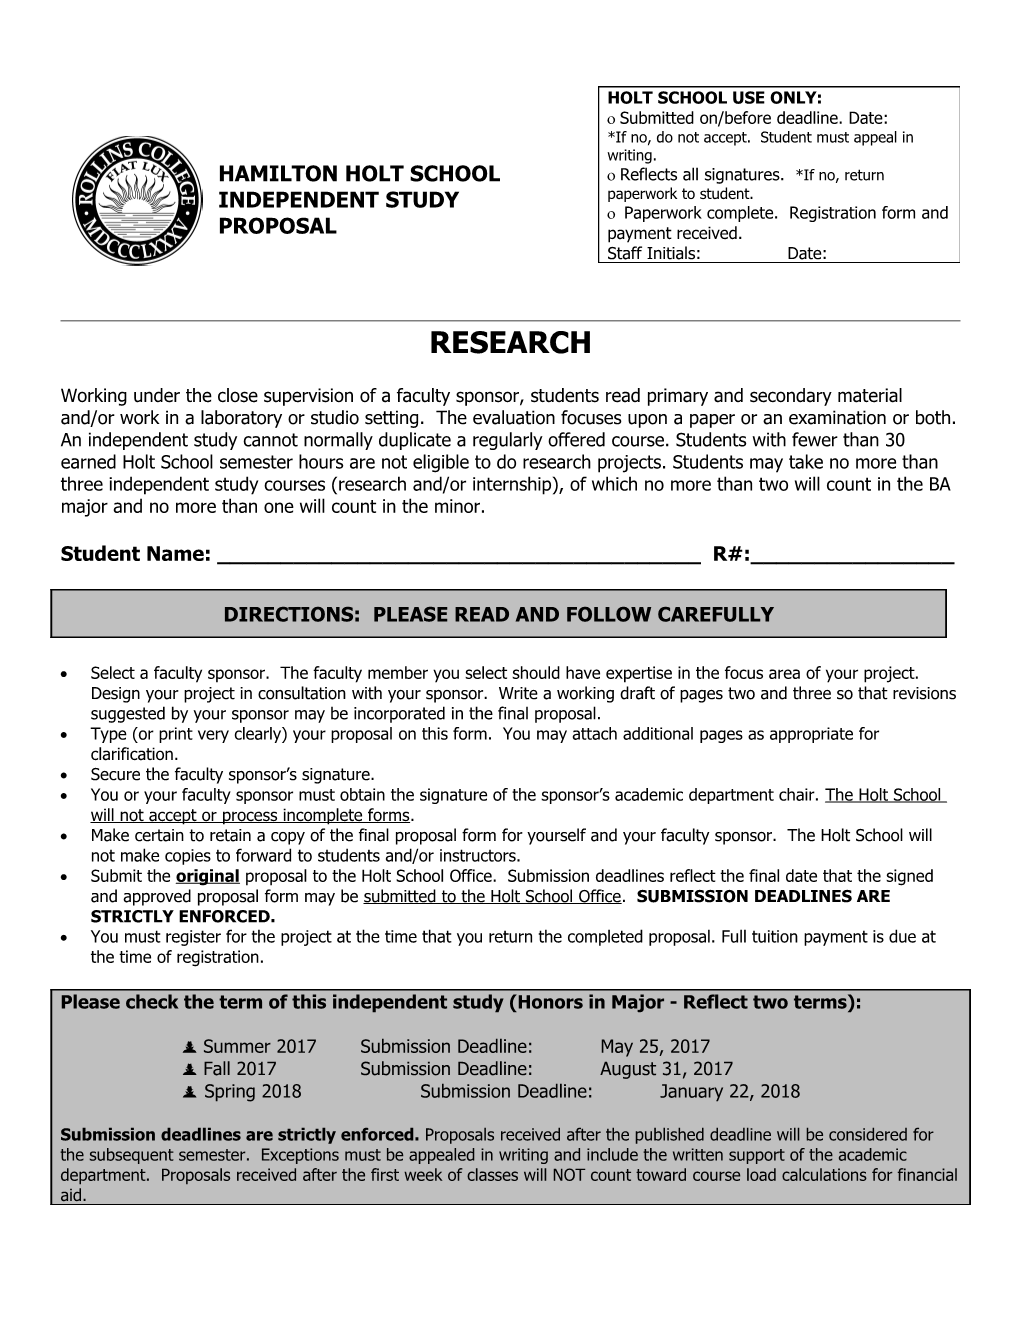 Hamilton Holt School Application for Independent Study